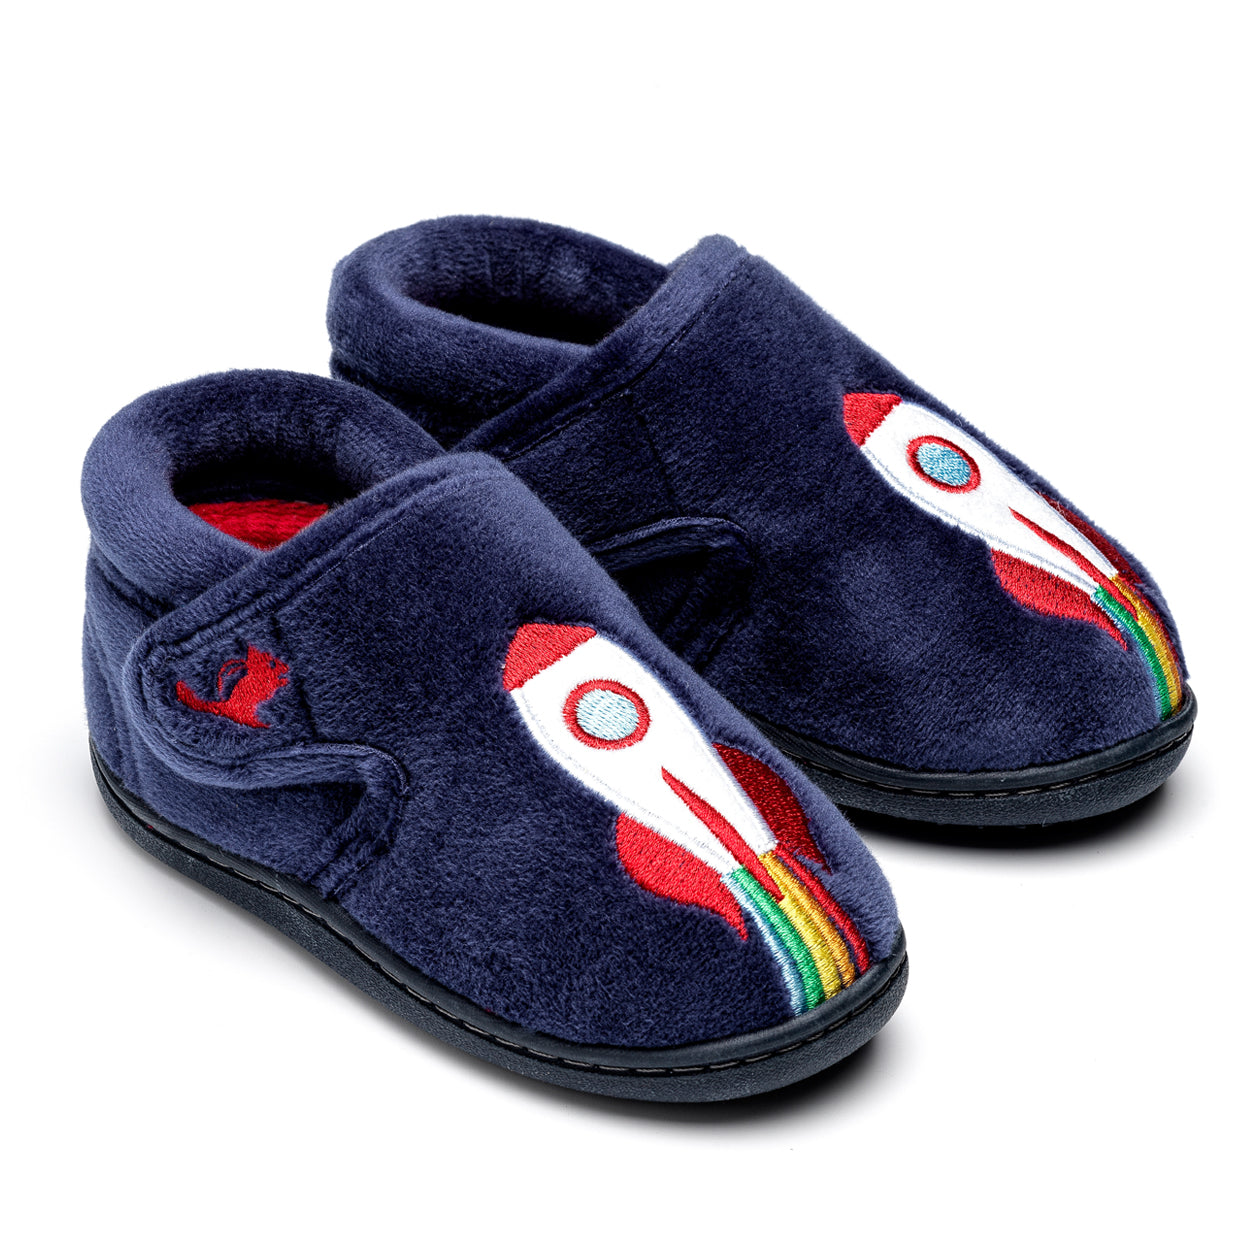 A pair of boys slippers by Chipmunks, style Blast, in navy multi with rocket design and velcro fastening. Angled view of right side.